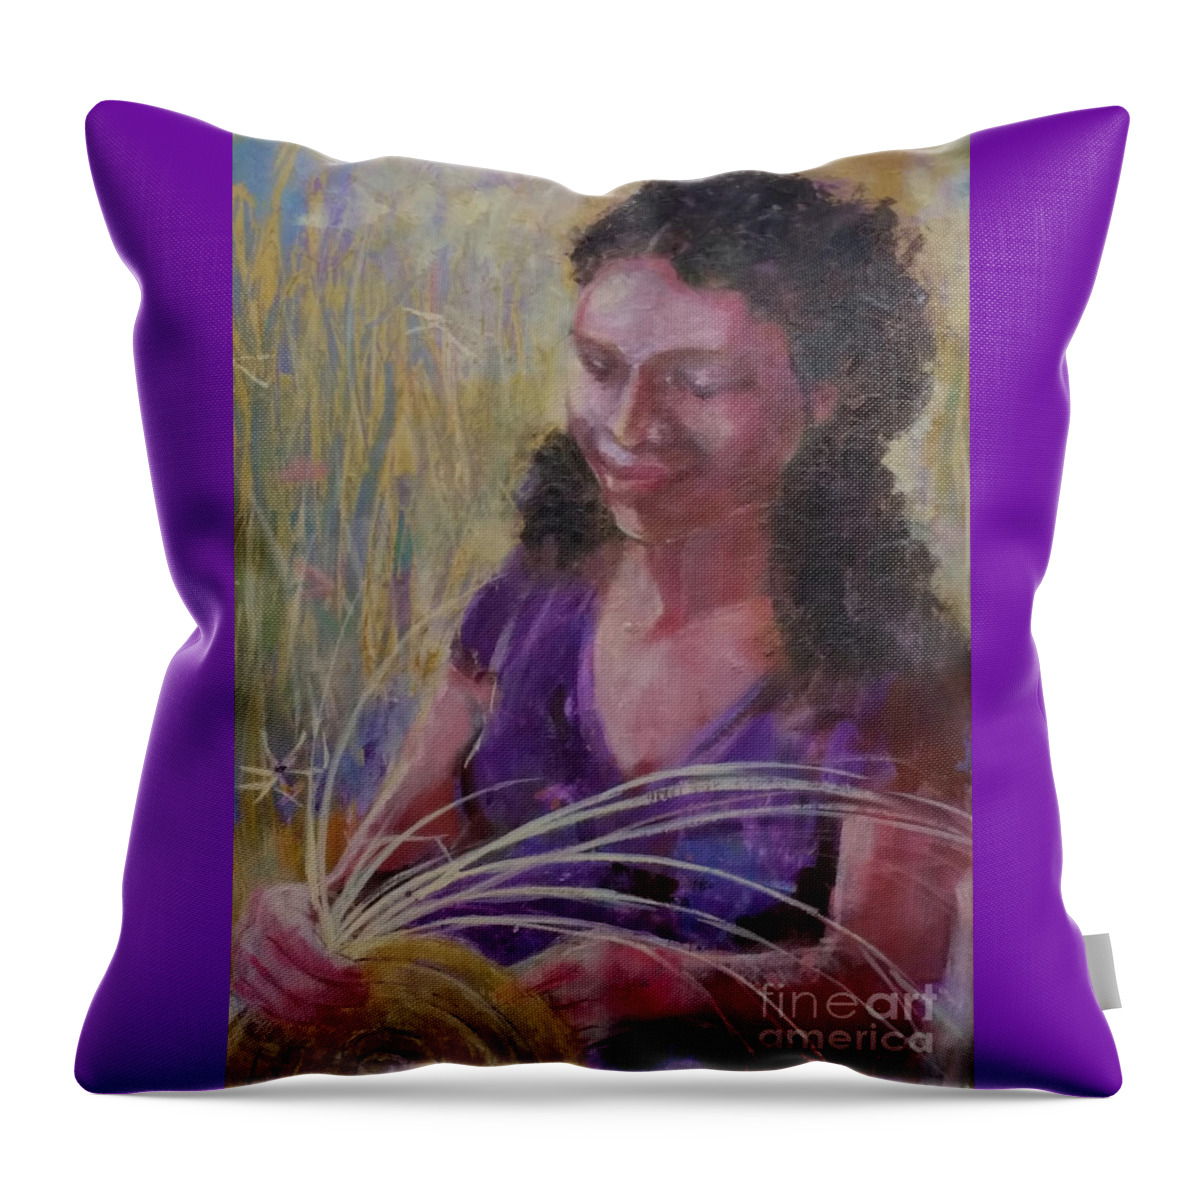 Basket Throw Pillow featuring the painting Dream Weaver by Gertrude Palmer